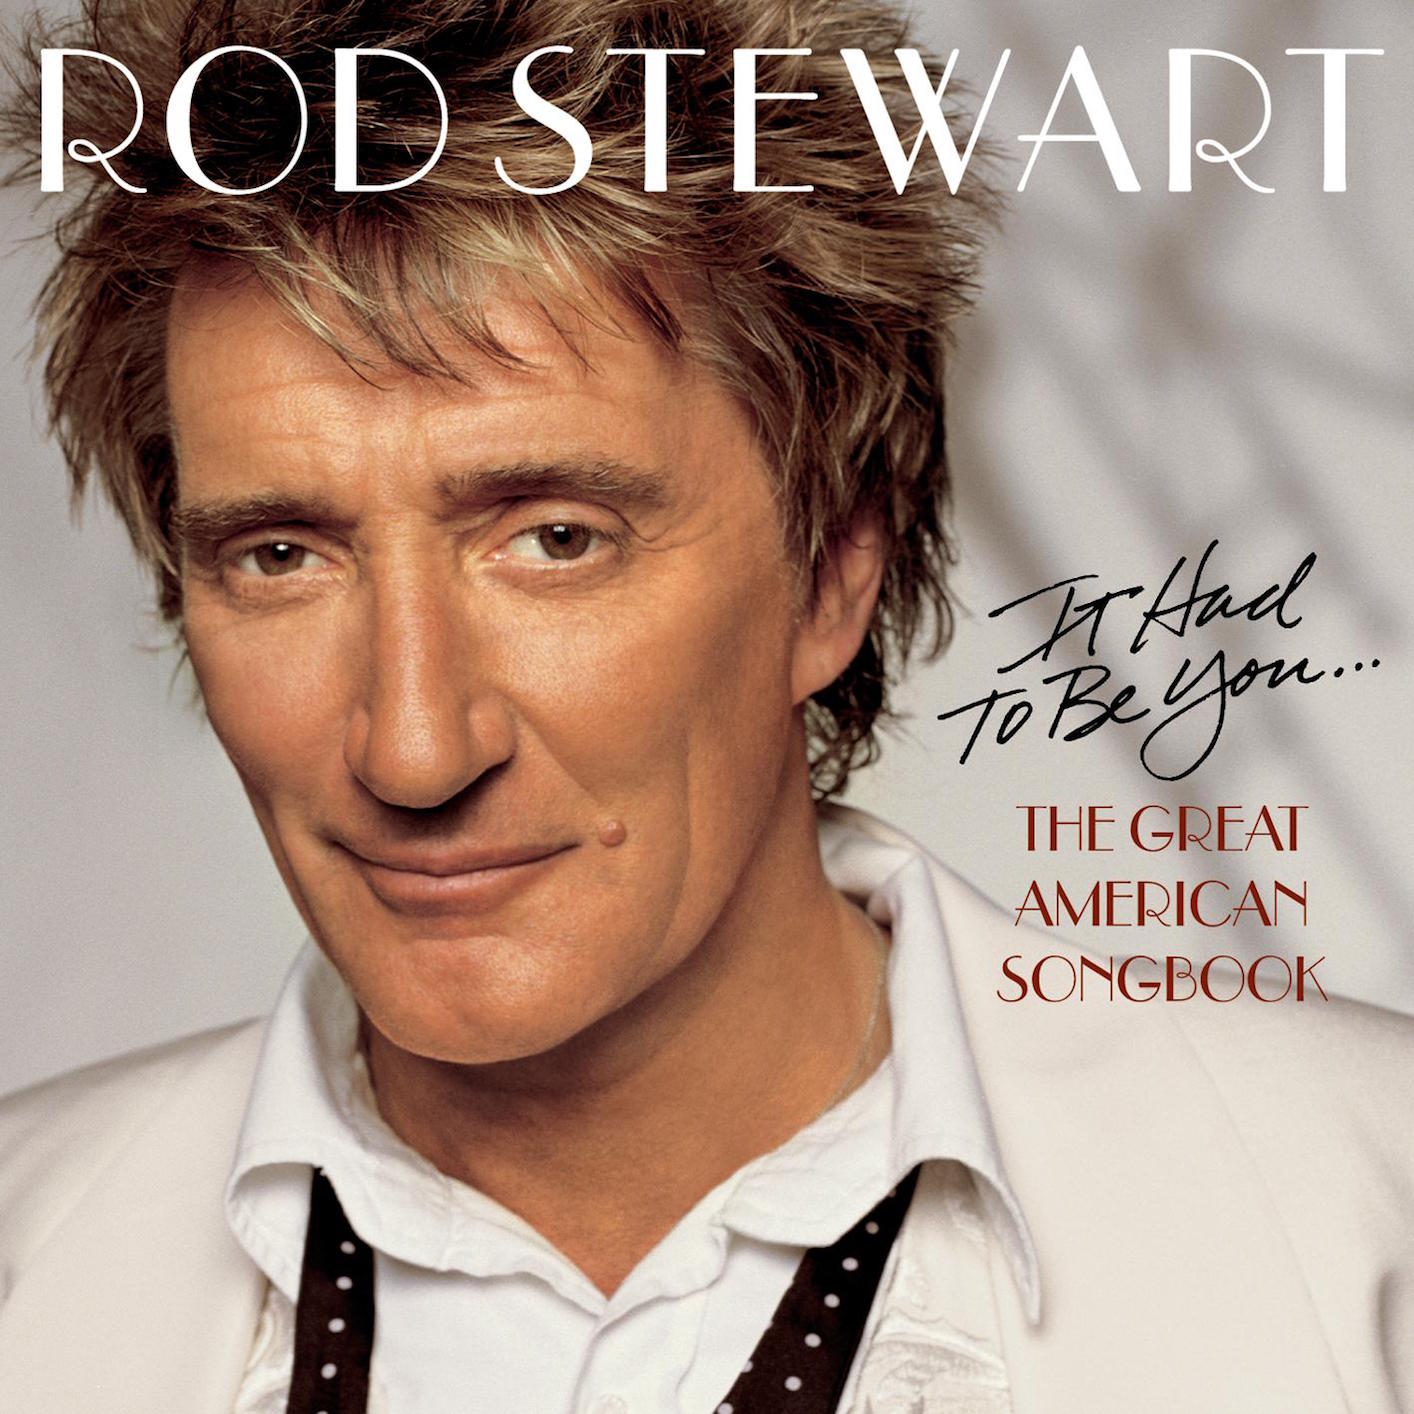 Rod Stewart - It Had To Be You… The Great American Songbook (2002/2015) [HDTracks FLAC 24bit/44,1kHz]